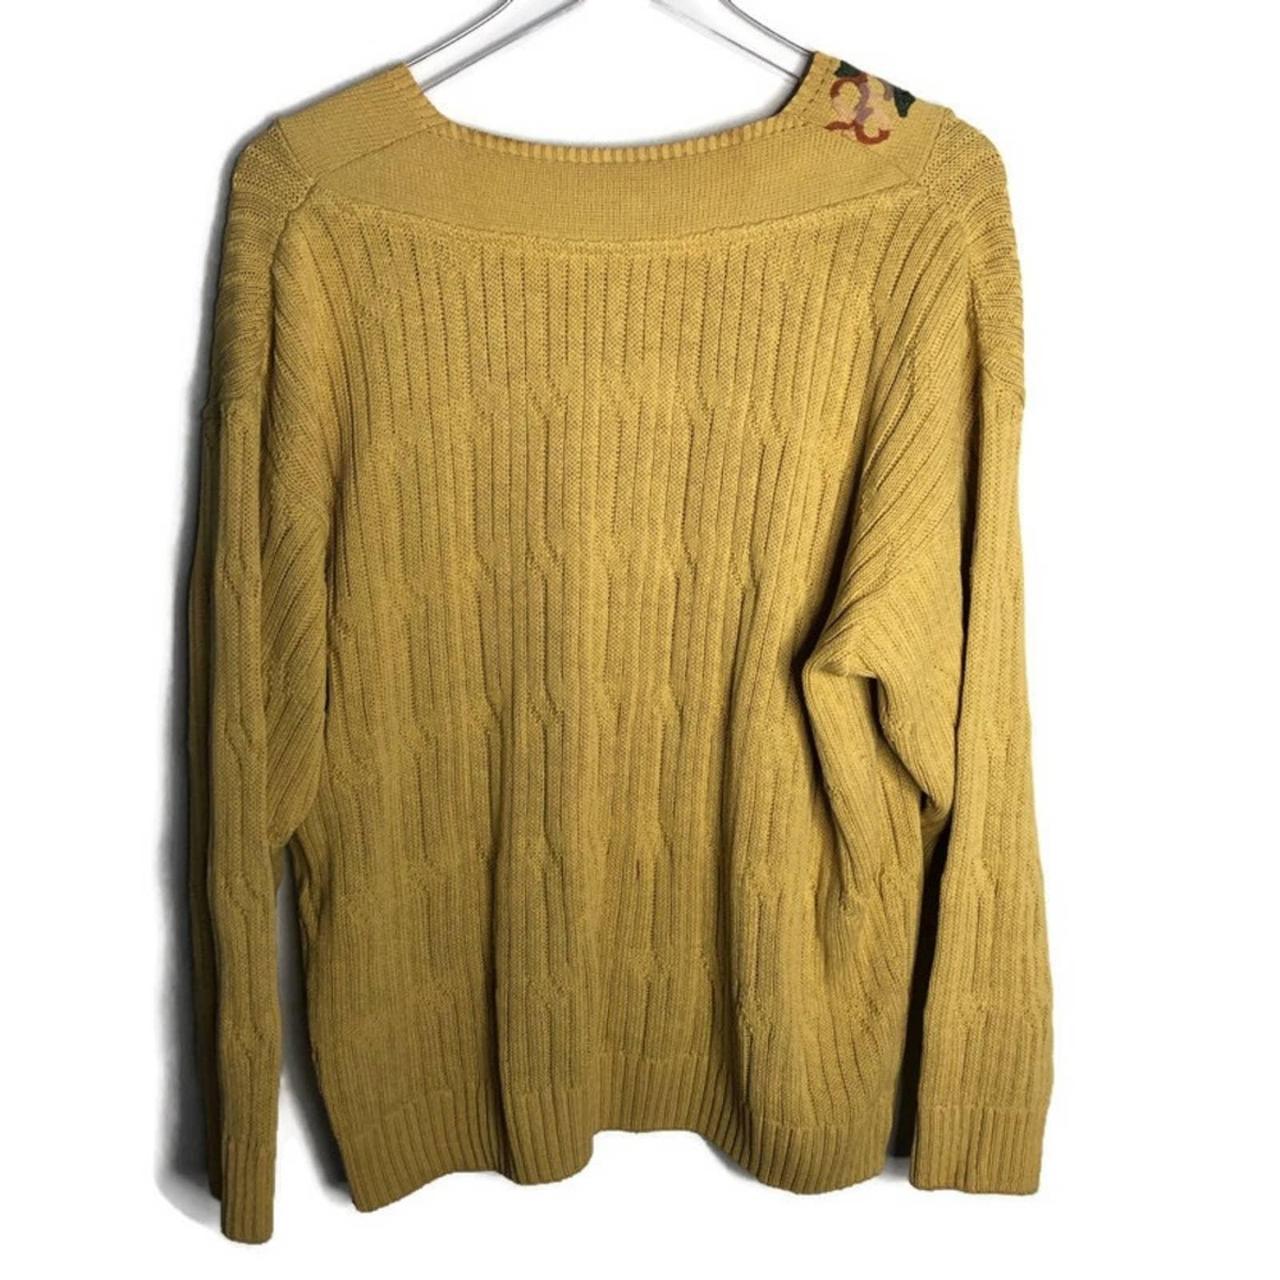 Product Image 2 - Vintage Yellow Marigold Knit Sweater